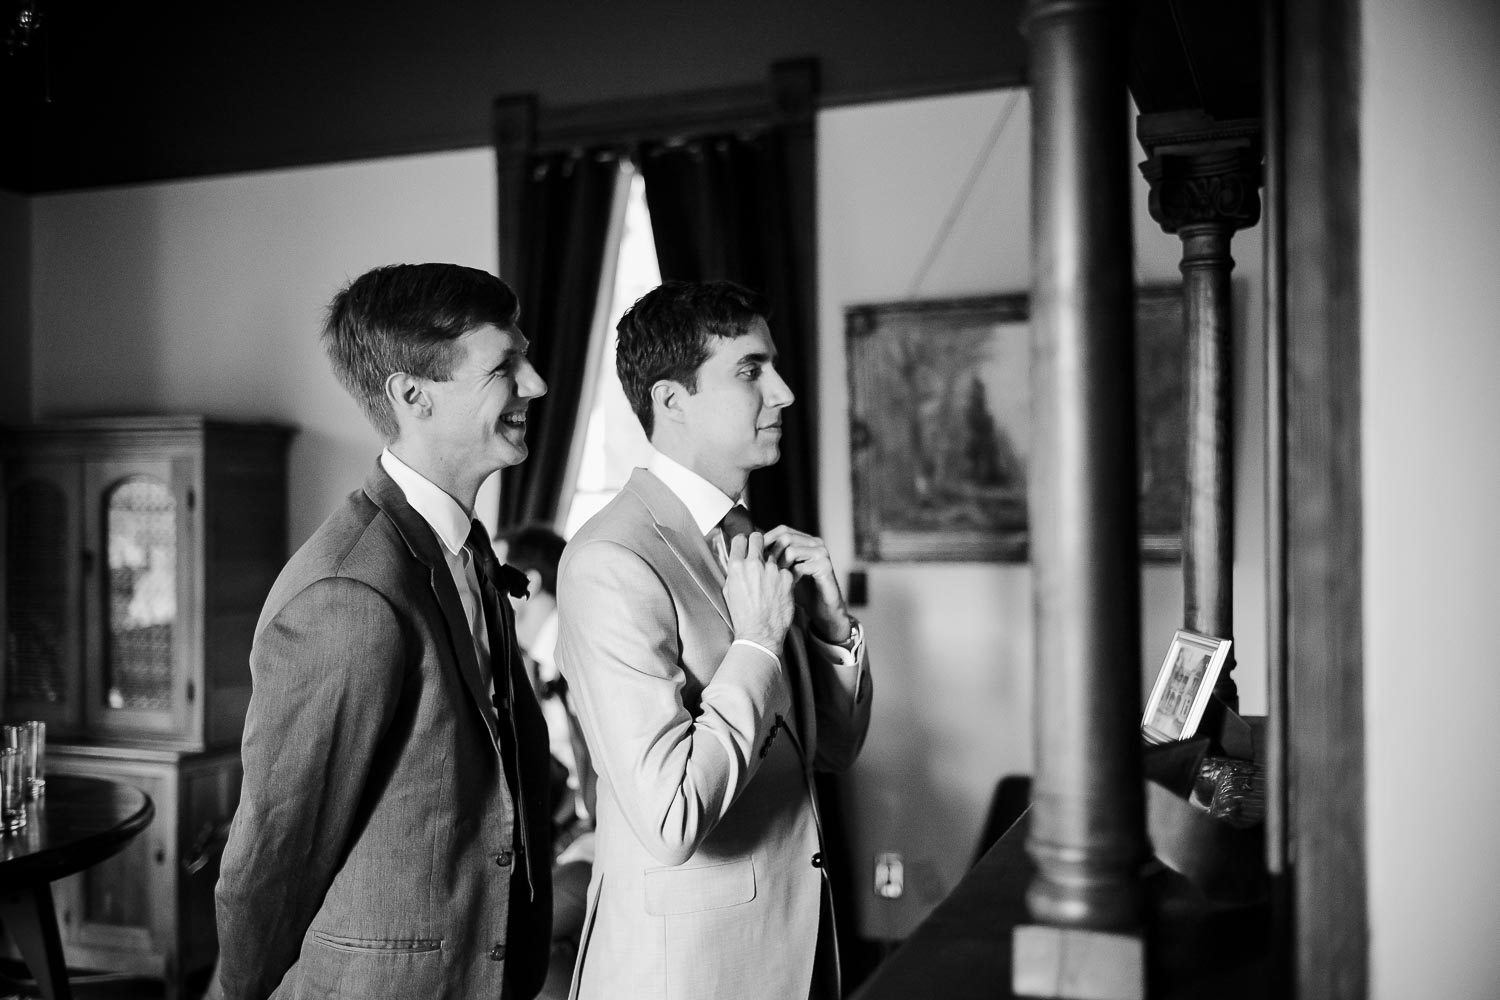 The groom checks in the mirror with a groomsmen nodding in approval Barr Mansion, Texas